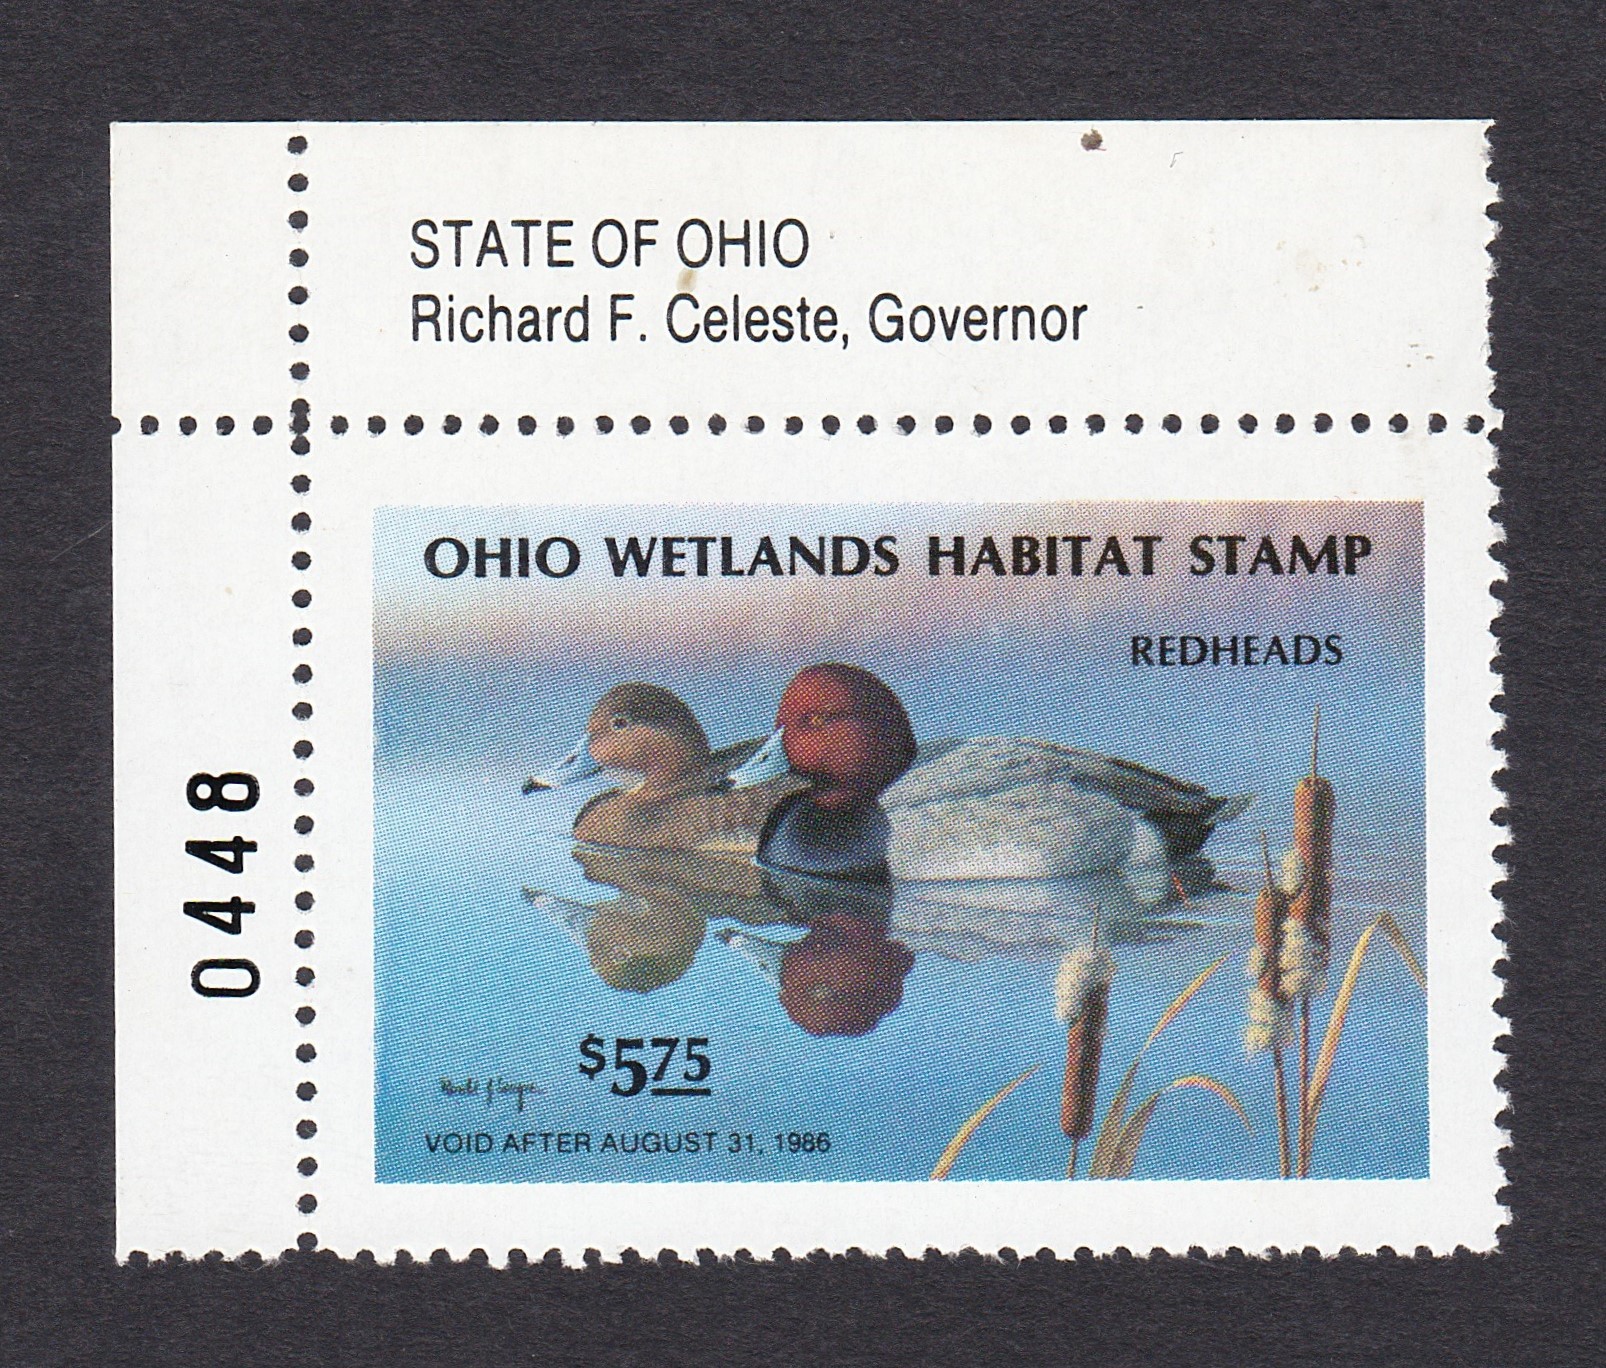 OH waterfowl W4 $5.75 MNH VF 1985 Plate number corner single w/State of Ohio P